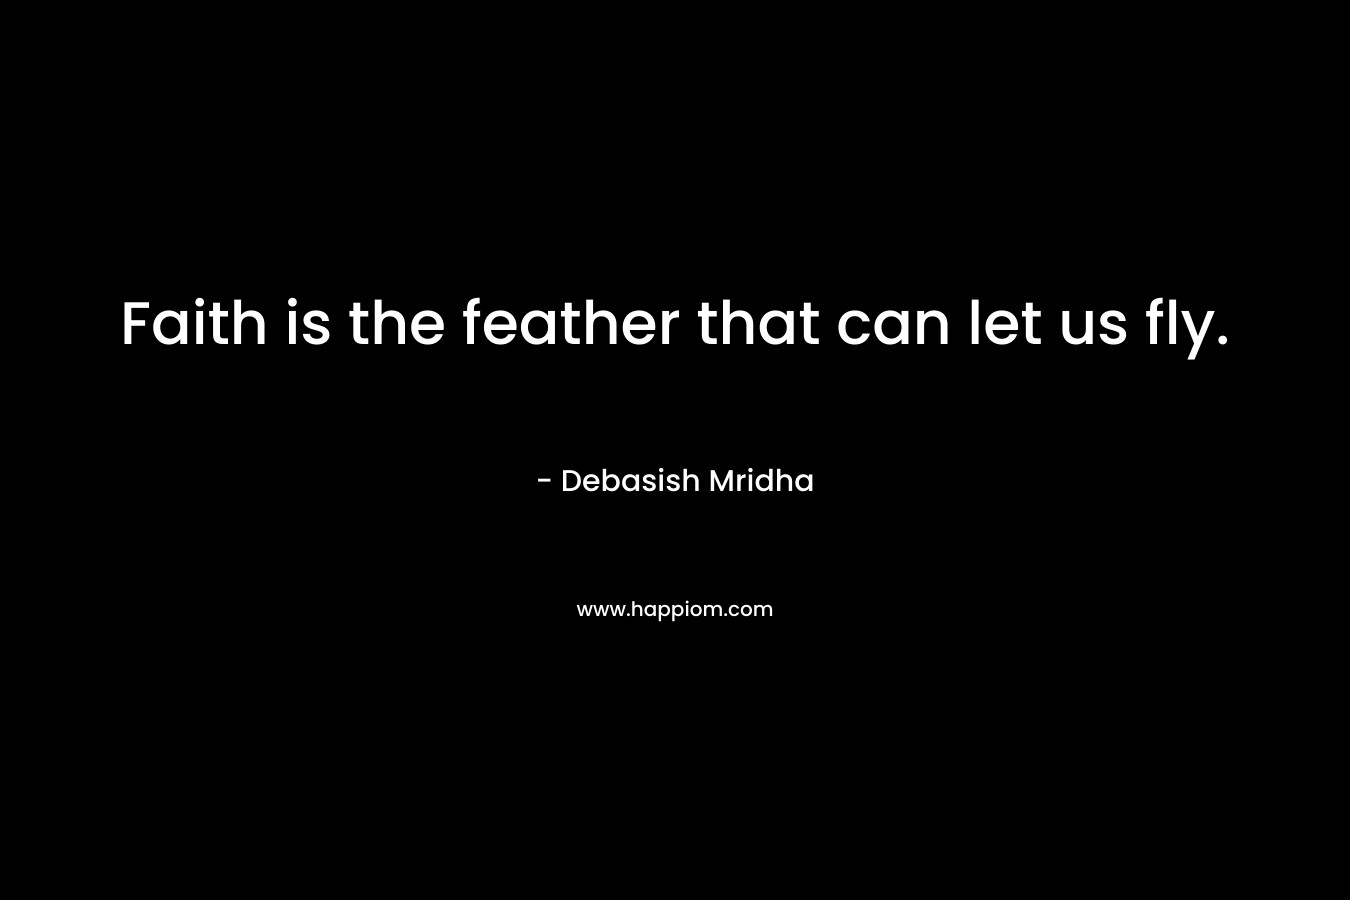 Faith is the feather that can let us fly.